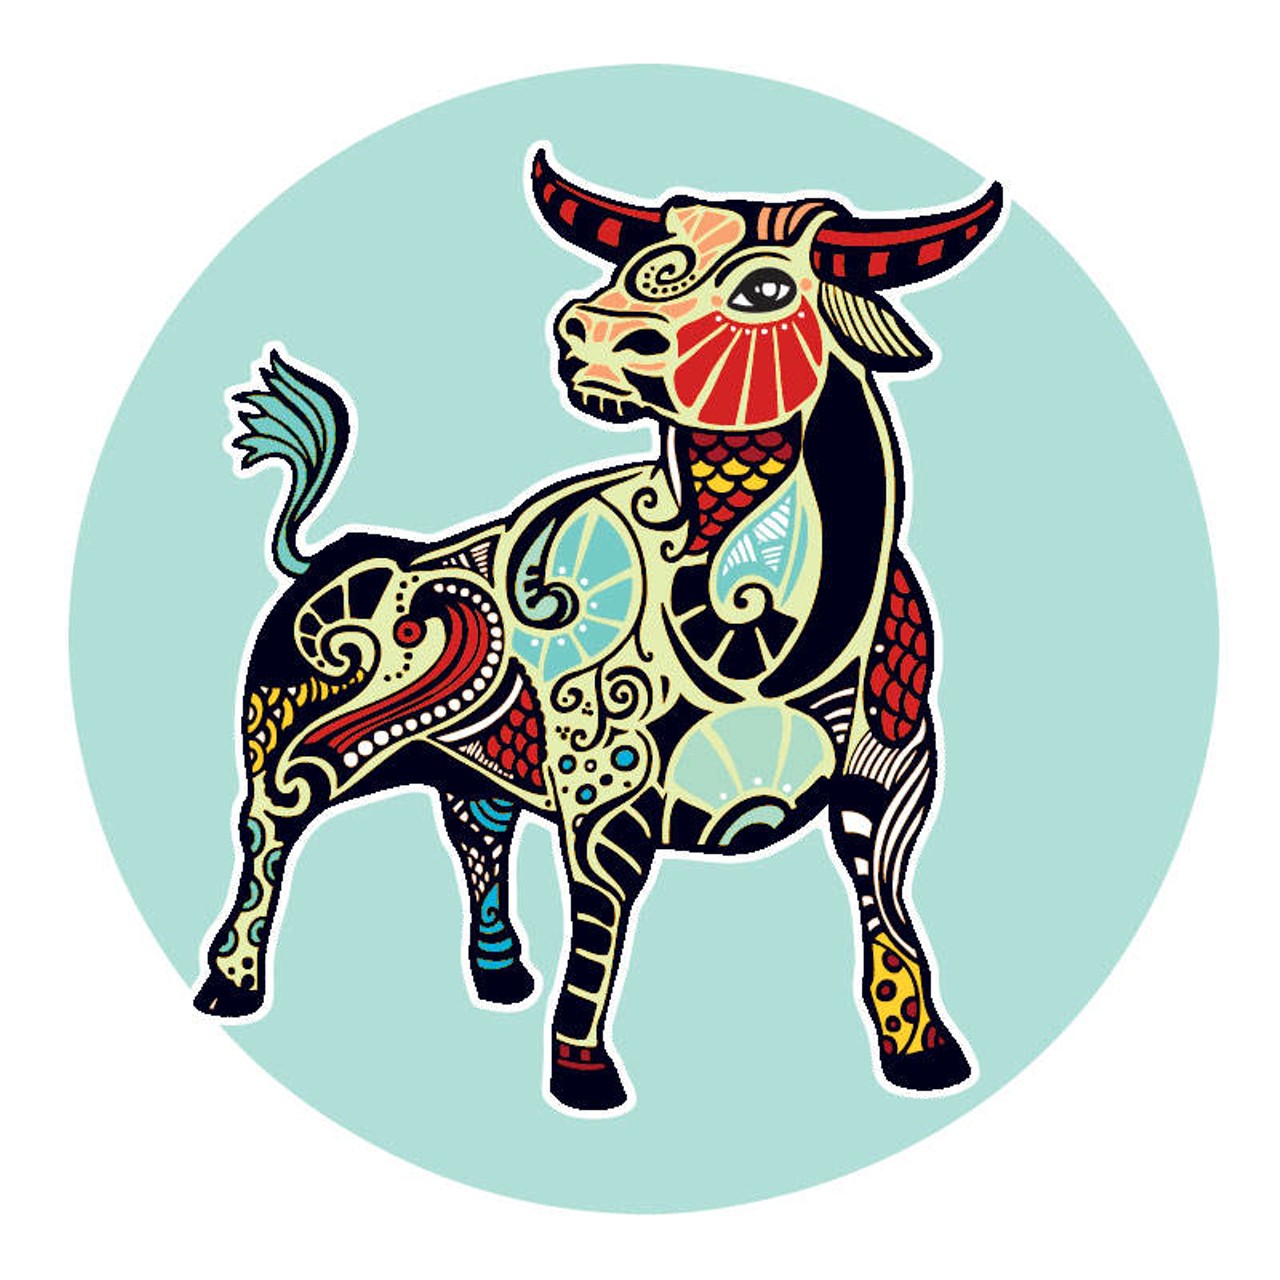 TAURUS (April 21 -May 20): 
Weighing your options, half of you is stunned at the thought of more than one possibility. The light is on and you&#146;re wondering how far you can actually go. Stretch this image over whatever your current scenario is showing you and latch on to the thought that you can do this. You could even take off and fly if your attitude is free of the need to remain chained to this post. Deeper concerns make it seem as if you aren&#146;t entitled to do much but keep dragging your heart around. Those issues no longer define you. Let the realm of possibilities take you away from all of this.